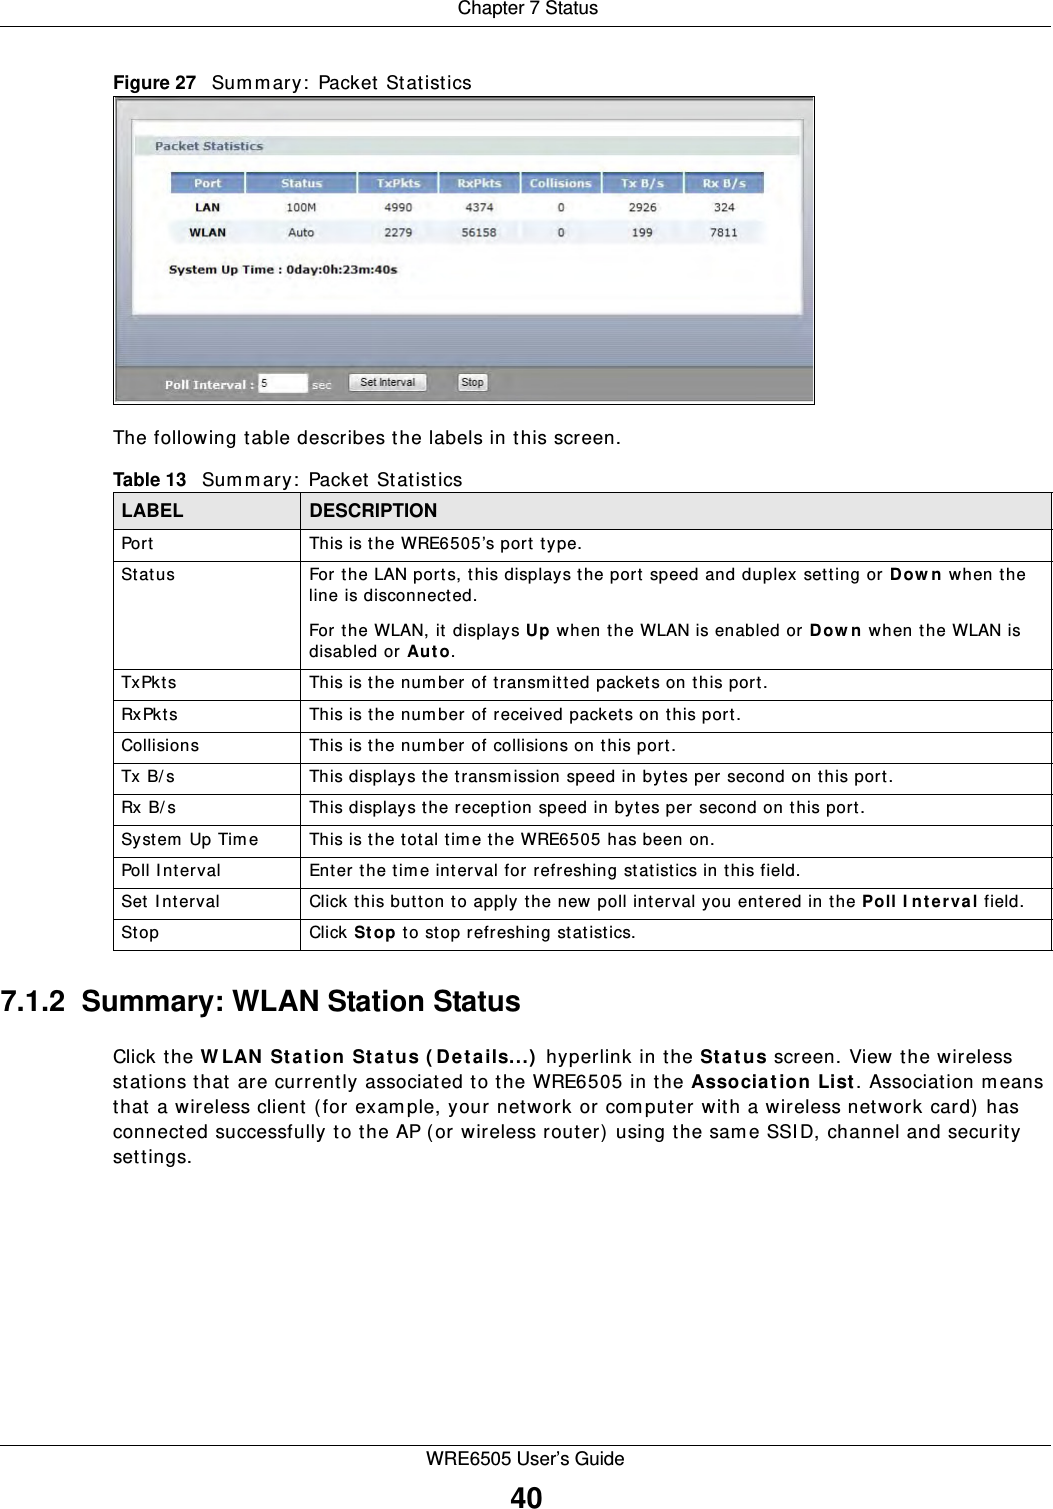  Chapter 7 StatusWRE6505 User’s Guide40Figure 27   Sum m ary:  Packet Statistics The following table describes the labels in this screen.7.1.2  Summary: WLAN Station StatusClick the W LAN  St at ion Stat us ( Det a ils...)  hyperlink in the St a t u s screen. View the wireless stations that are currently associated to the WRE6505 in the Associa t ion List. Association m eans that a wireless client (for exam ple, your network or com puter with a wireless network card) has connected successfully to the AP ( or wireless router) using the same SSI D, channel and security settings.Table 13   Summ ary:  Packet StatisticsLABEL DESCRIPTIONPort This is the WRE6505’s port type.Status  For the LAN ports, this displays the port speed and duplex setting or Dow n  when the line is disconnected.For the WLAN, it displays Up when the WLAN is enabled or D ow n when the WLAN is disabled or Au t o.TxPkts  This is t he num ber of transmitted packets on this port.RxPkts  This is the num ber of received packets on this port.Collisions  This is the num ber of collisions on t his port.Tx B/s  This displays the transmission speed in bytes per second on this port.Rx B/ s This displays the reception speed in bytes per second on this port.System  Up Time This is the total tim e the WRE6505 has been on.Poll I nterval Enter the time interval for refreshing statistics in this field.Set I nterval Click this but ton to apply the new poll interval you entered in the Poll I nt er va l field.Stop Click St op  to stop refreshing statistics.